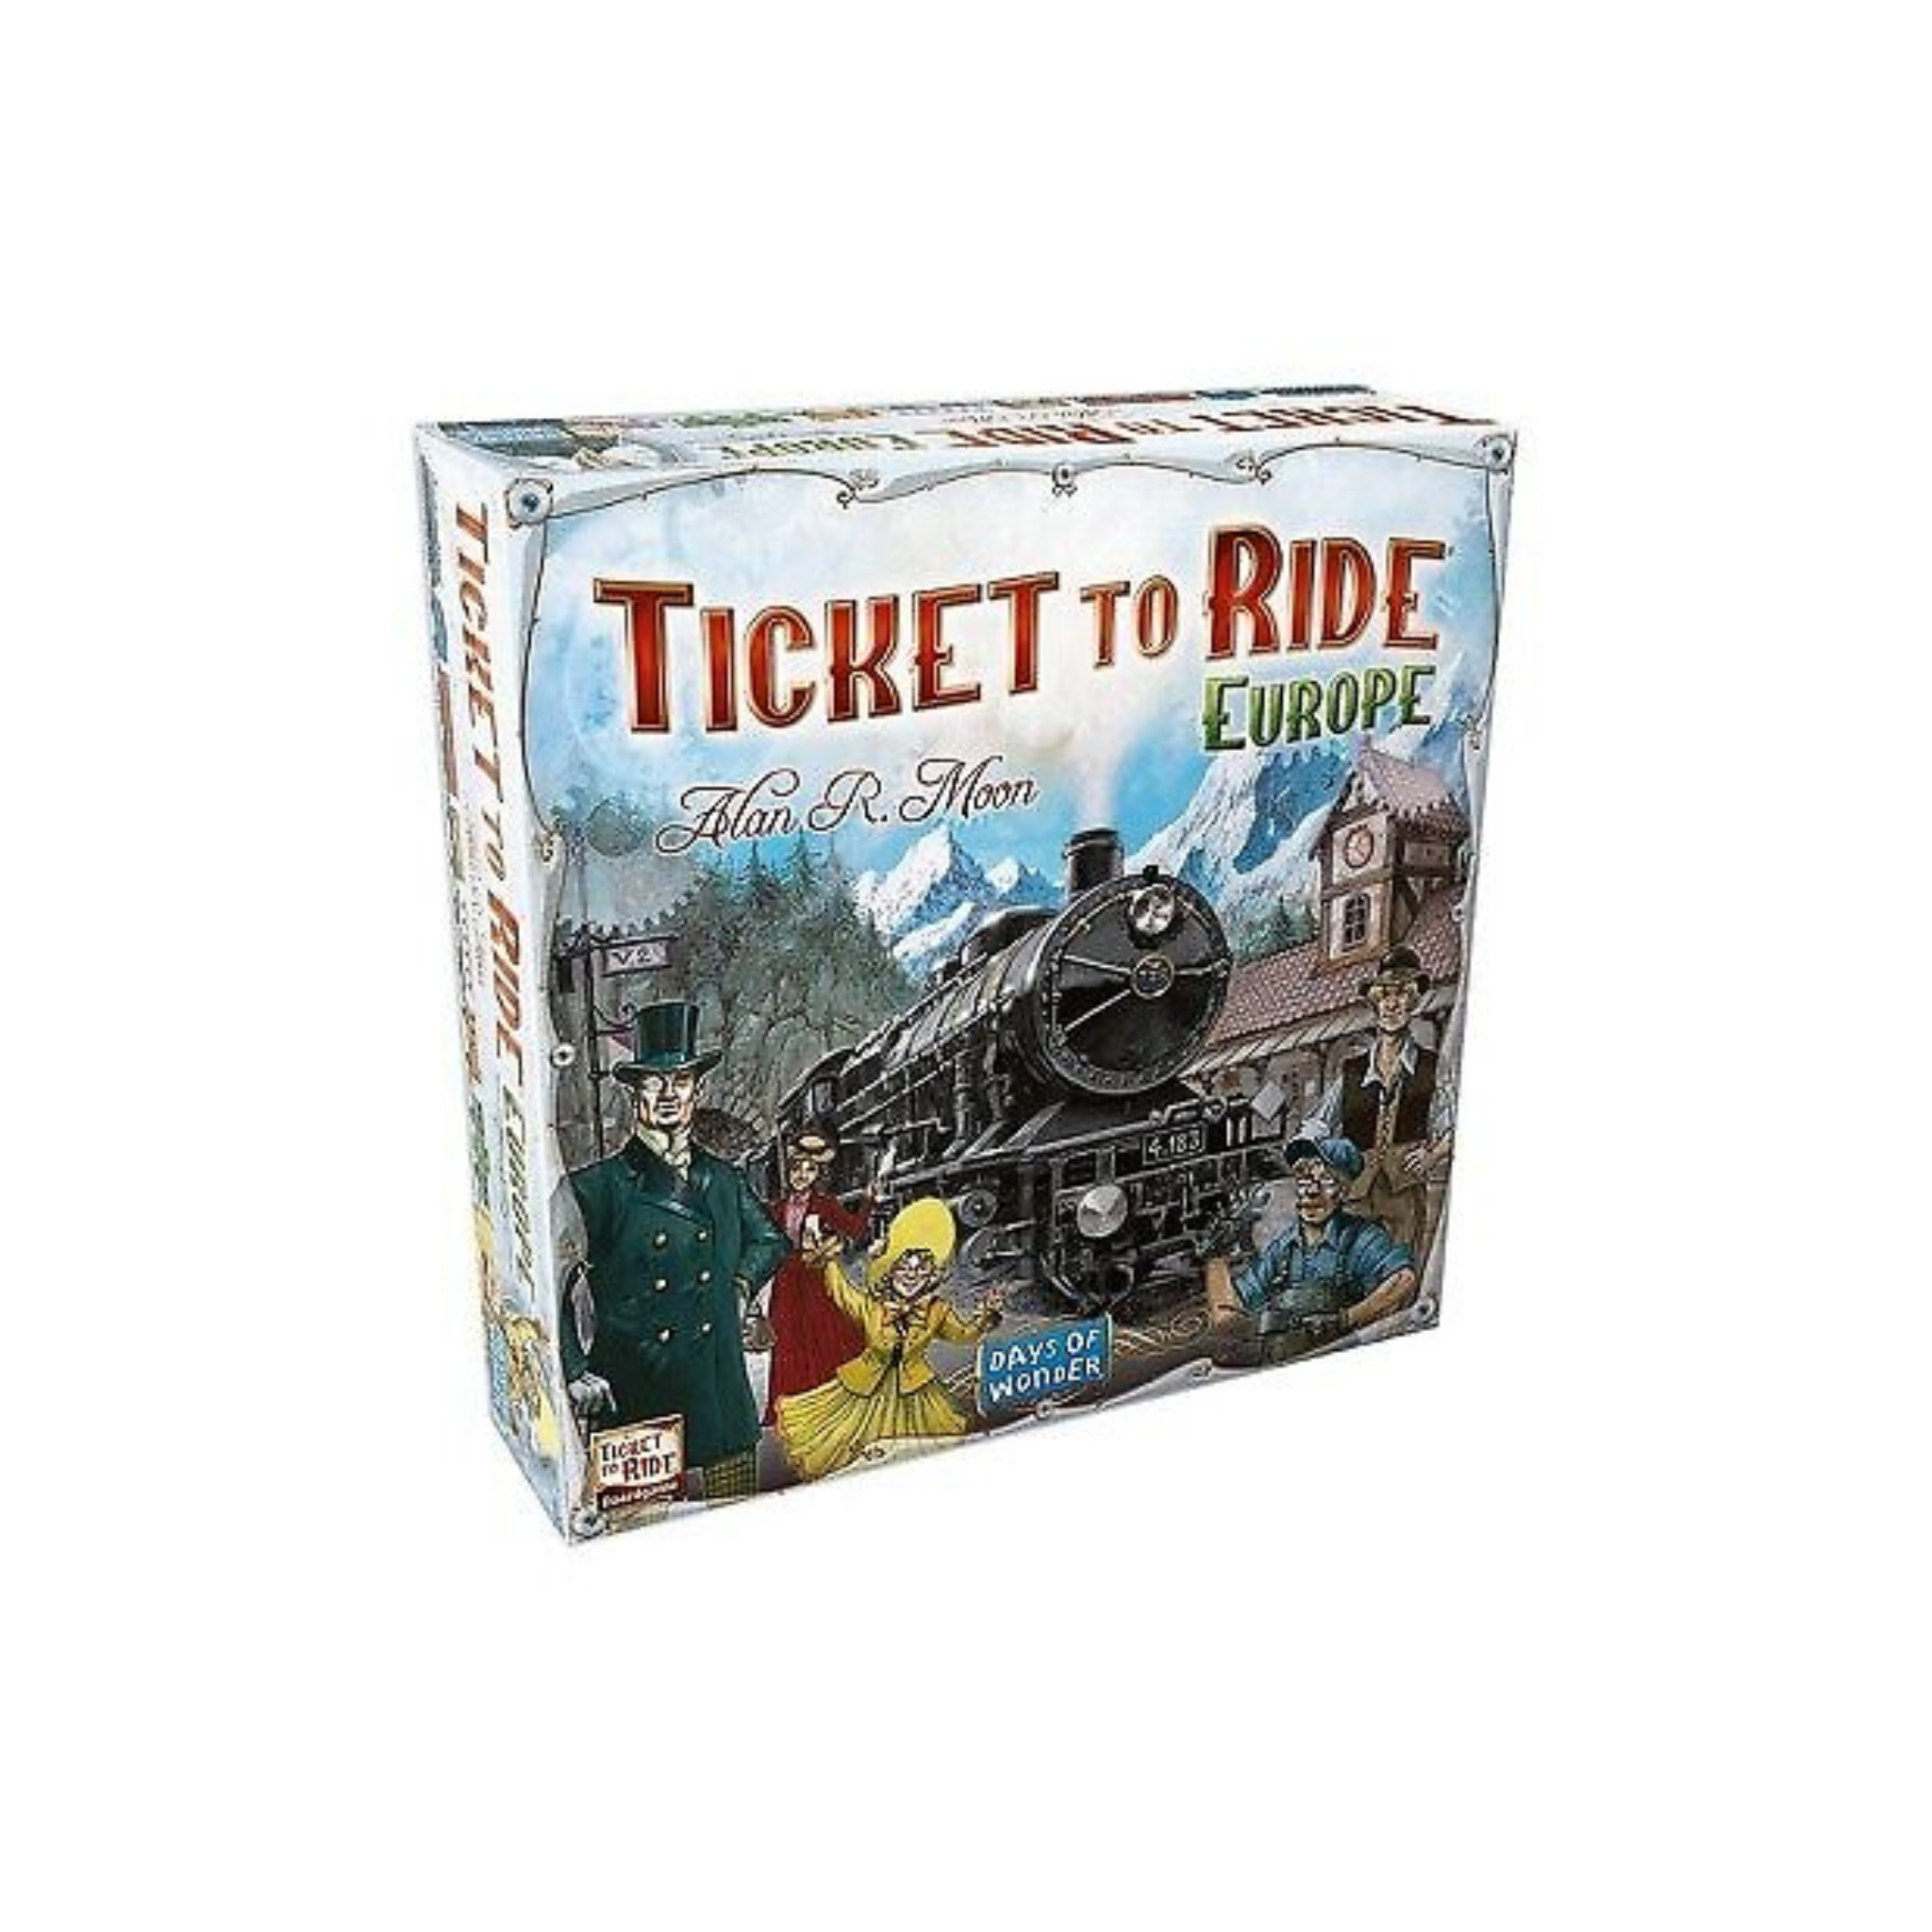 Save 50% On Board Games Via eBay Daily Deals! Save Big On Ticket To Ride Europe, Catan, Chess, Backgammon, And More!